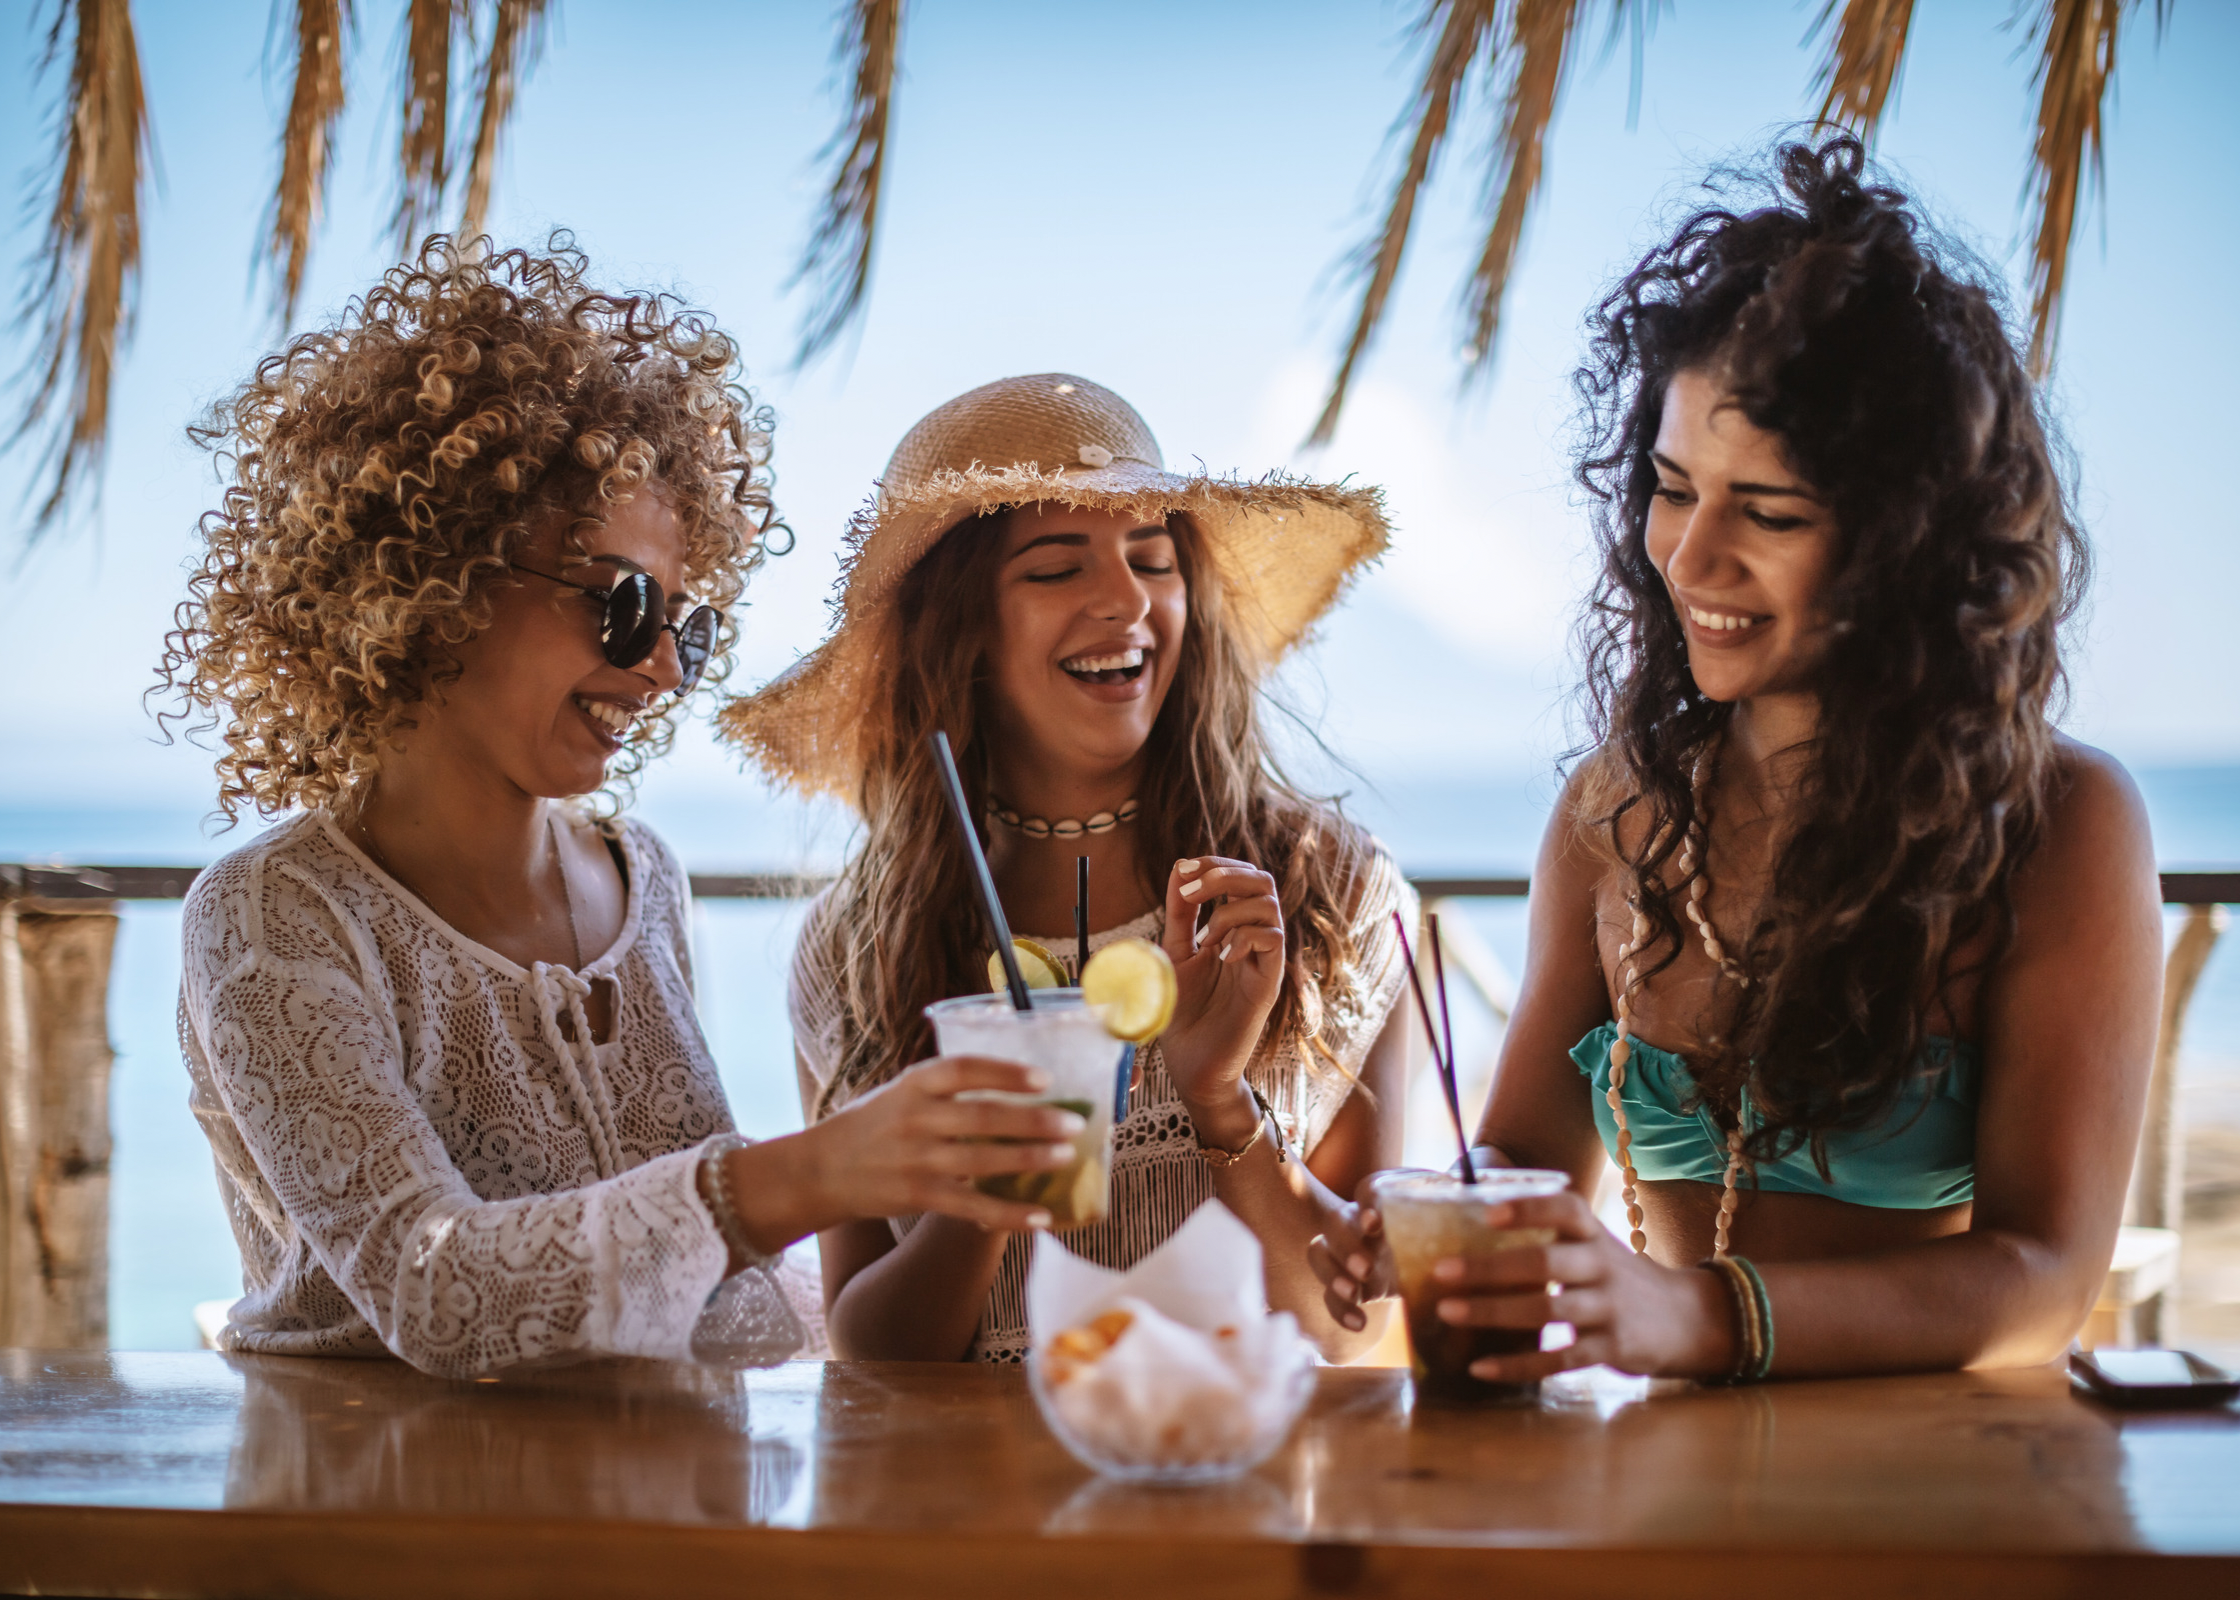 best friends having a drink and brunch on holiday. relax after a long, hard, stressful day at work or at home. Ways to unwind and decompress after a busy day and relieve stress.